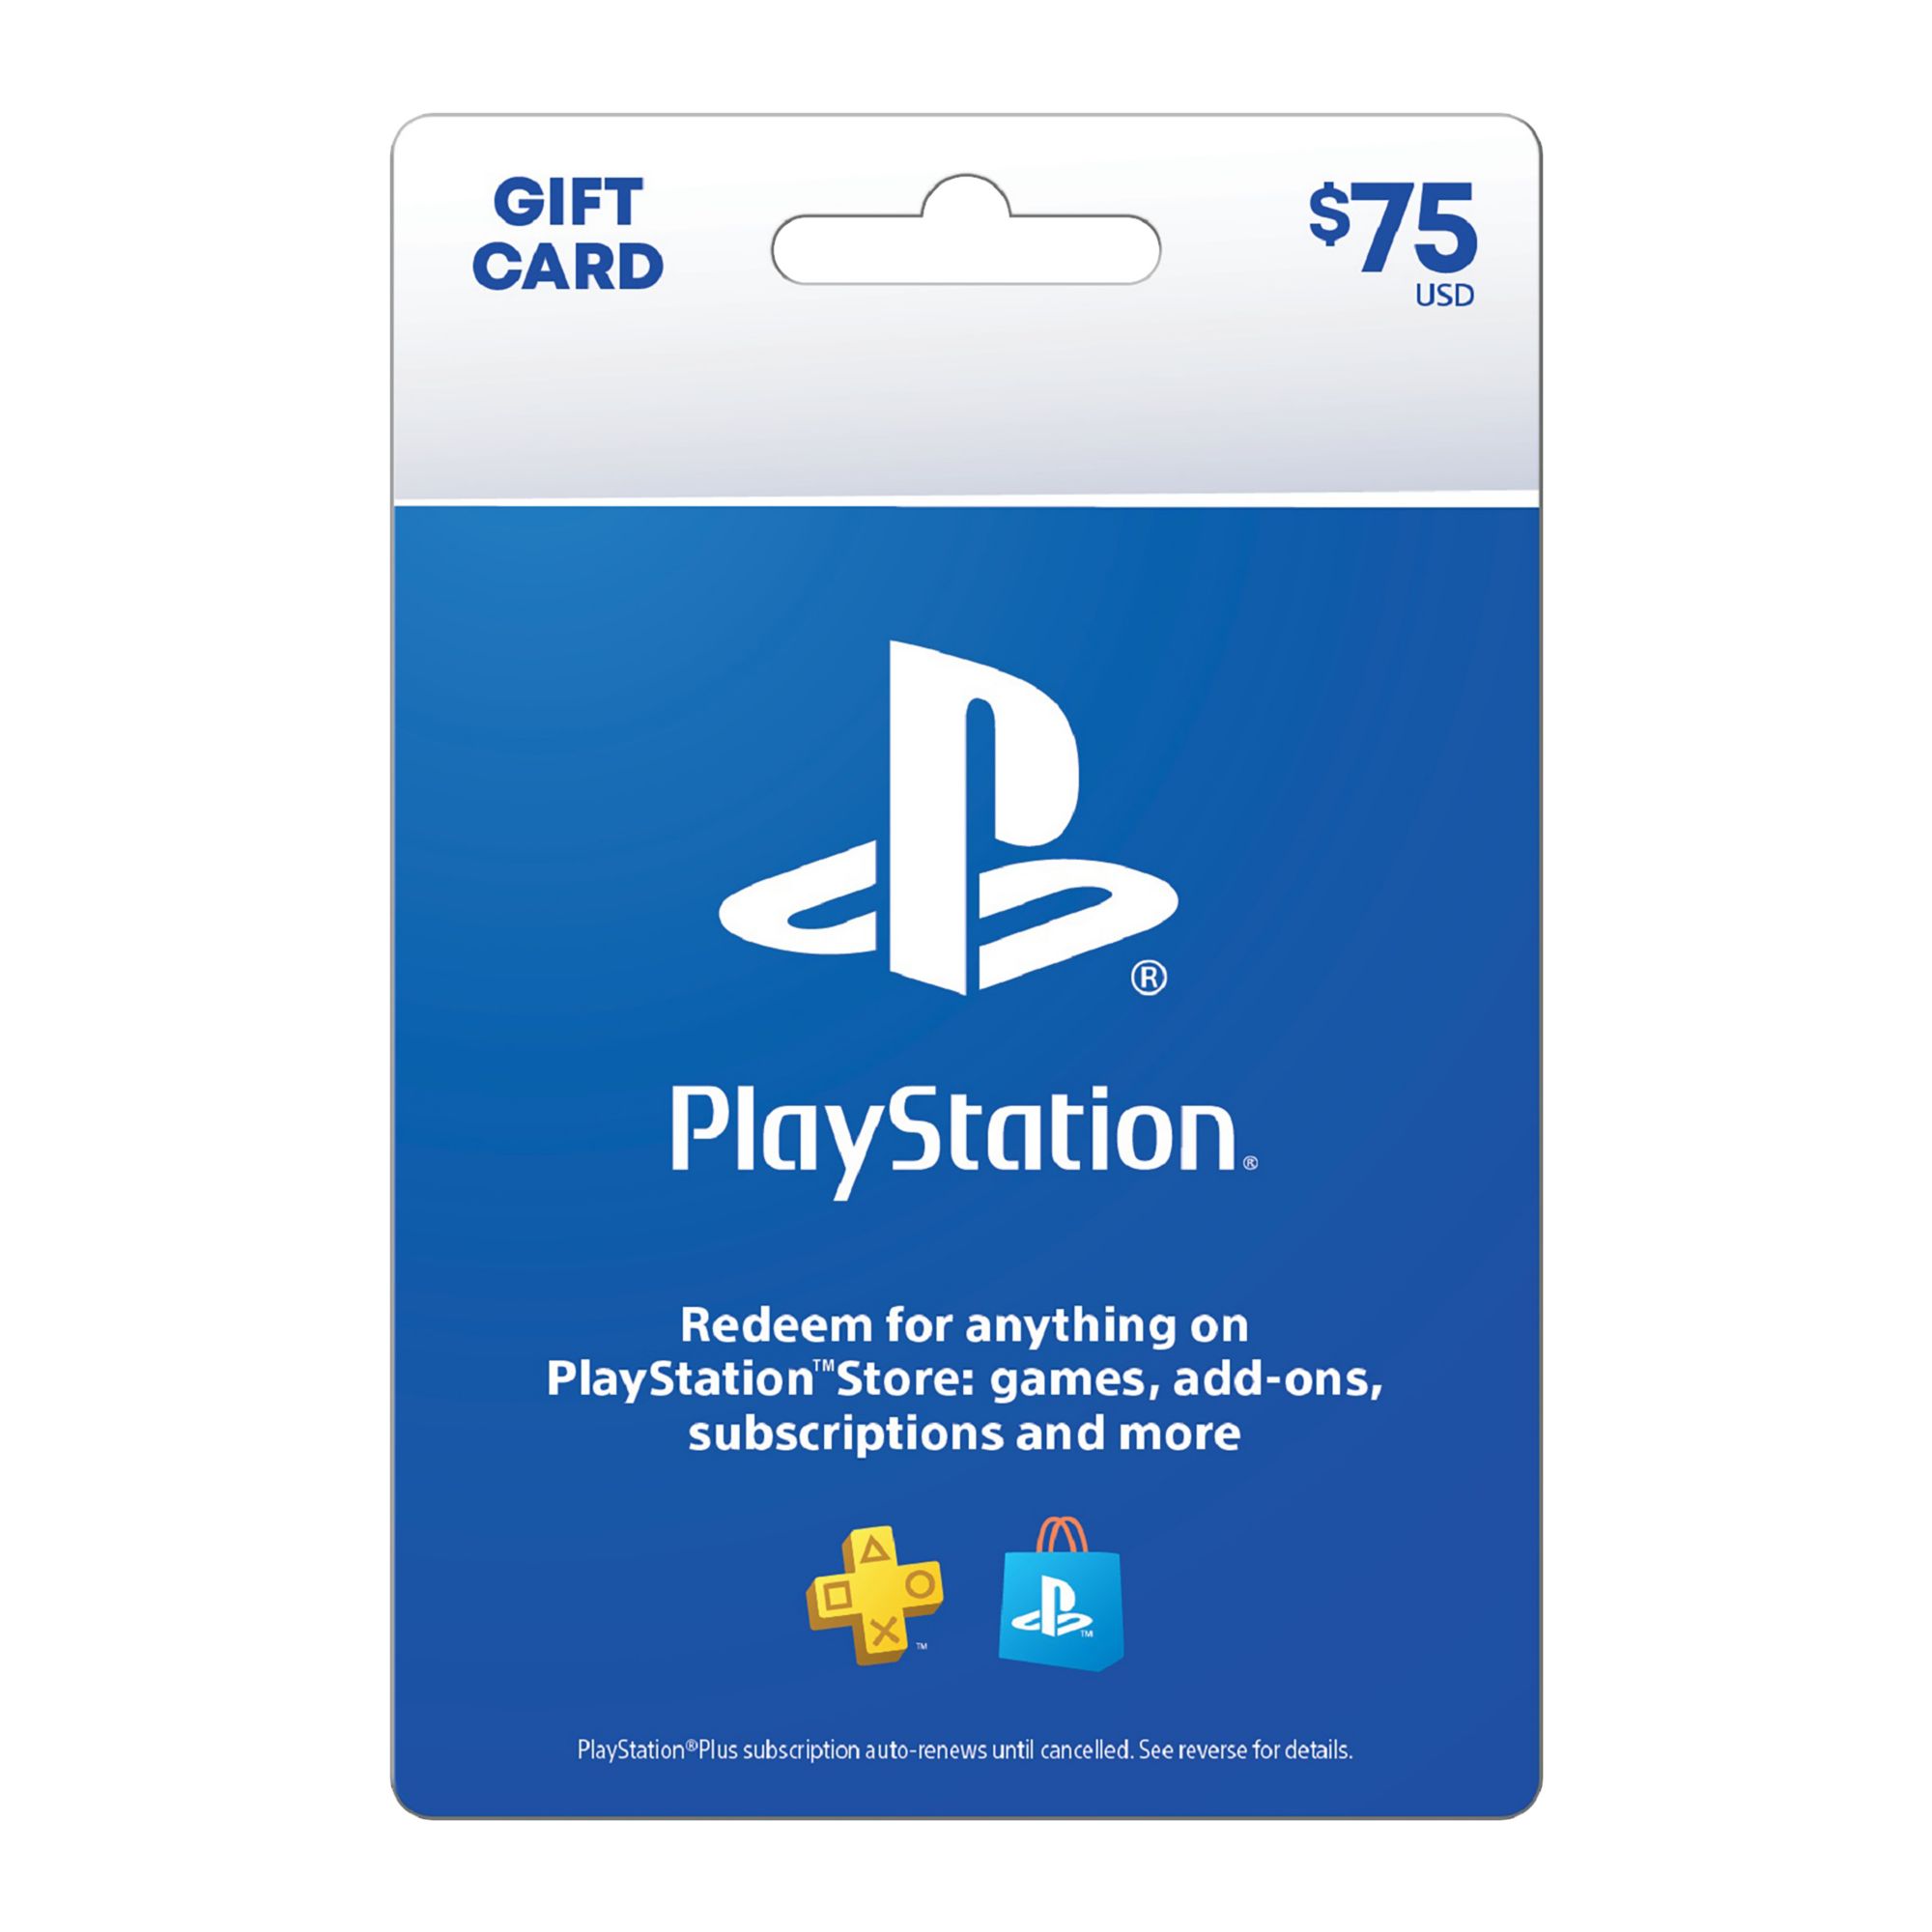 GAMESTOP GIFT CARD 150 100 50 GAMES TOY ONLINE COMPUTER ACCESSORY